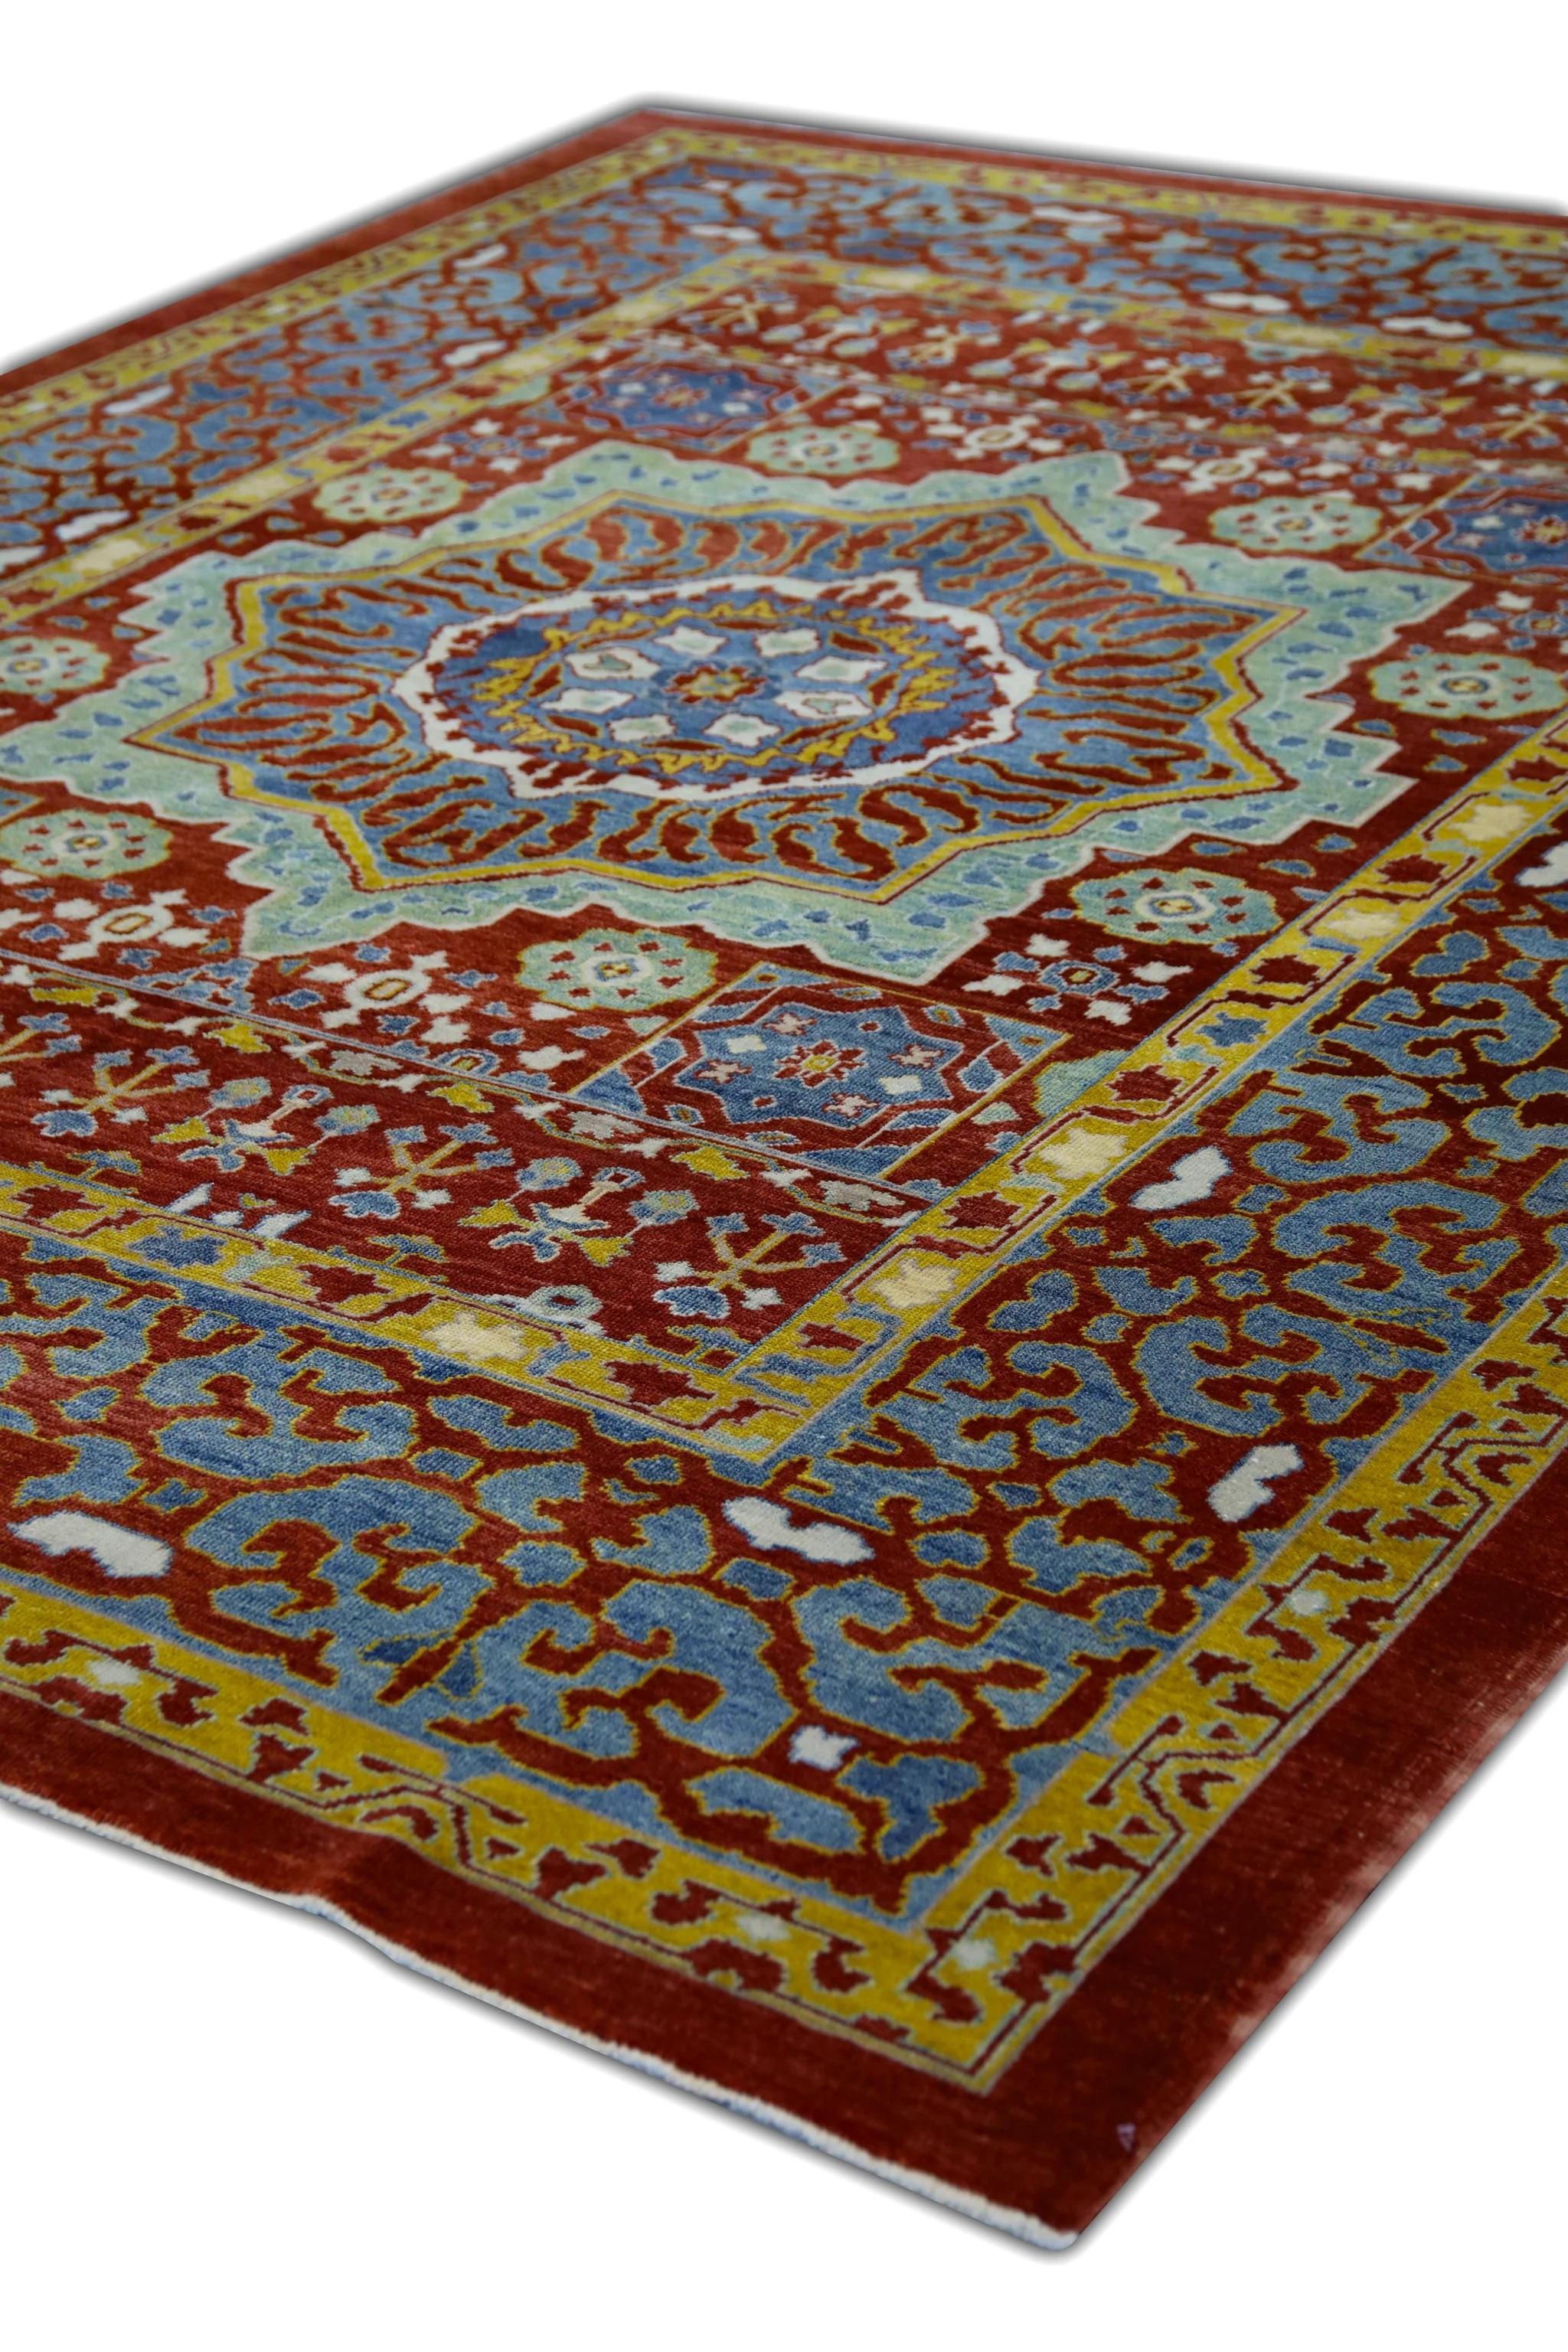 Contemporary Red and Blue Floral Turkish Finewoven Wool Oushak Rug 8'3